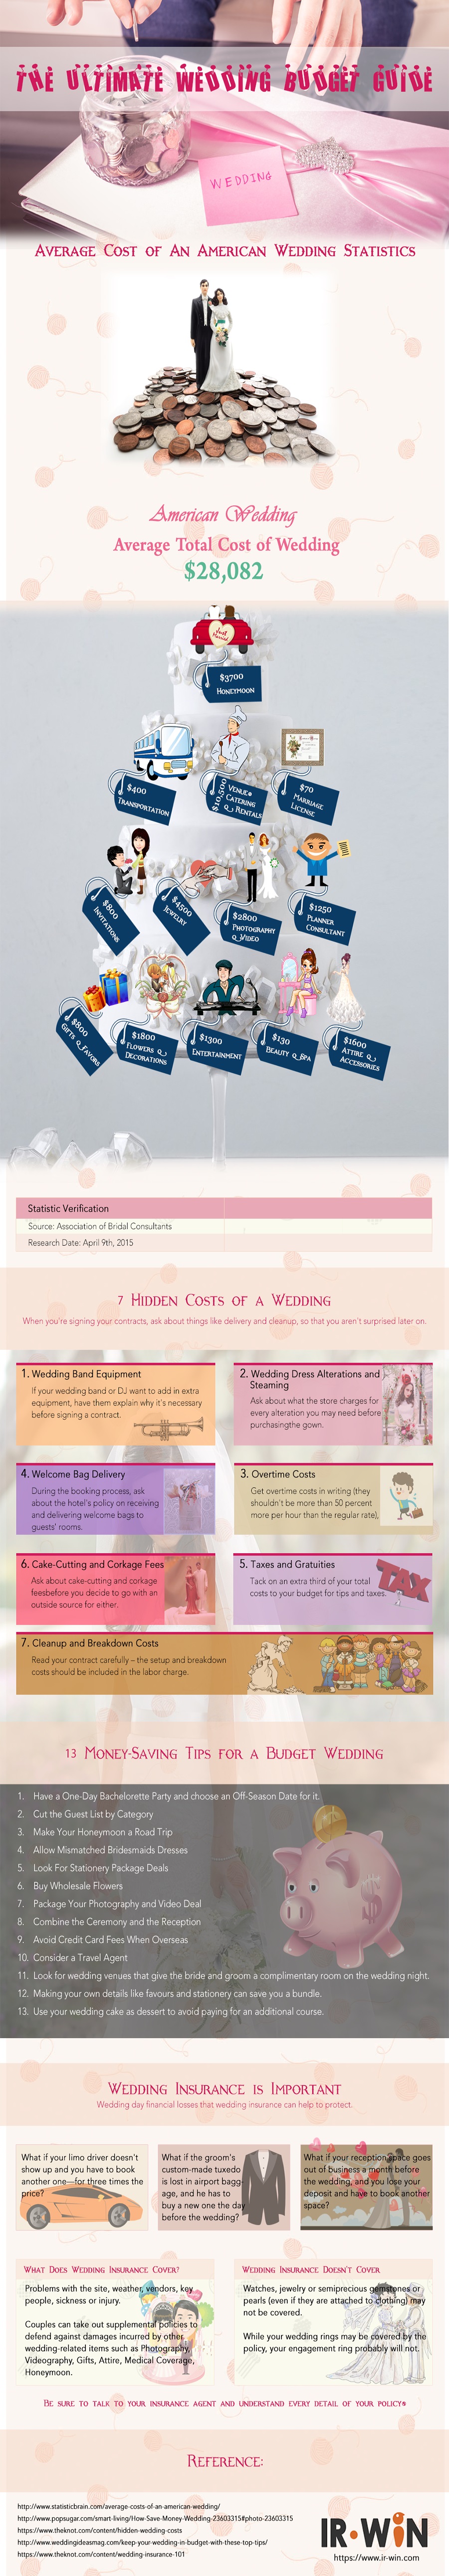 Ultimate-Wedding-Budget-Guide-Infographic